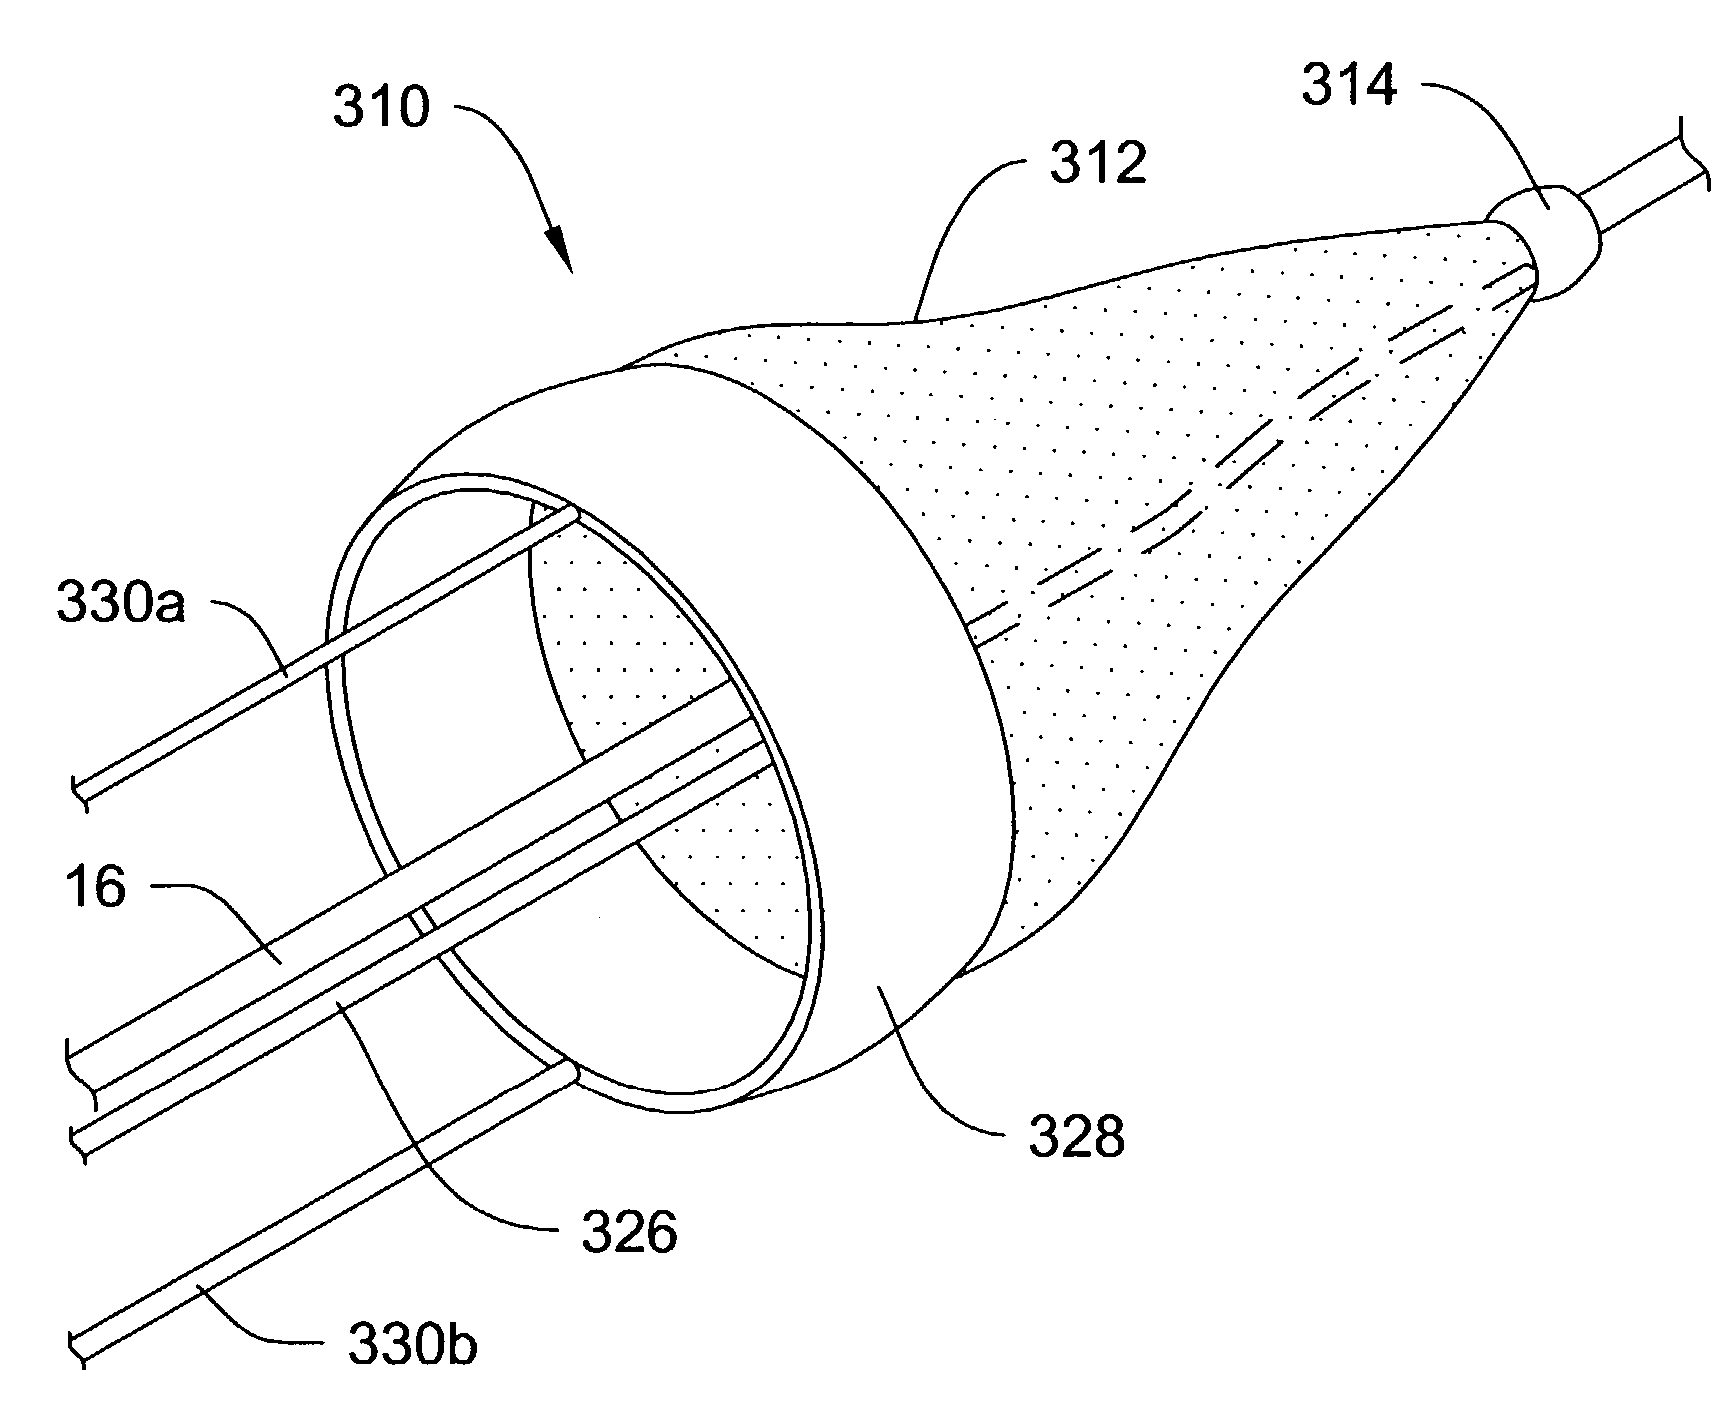 Multi-wire embolic protection filtering device